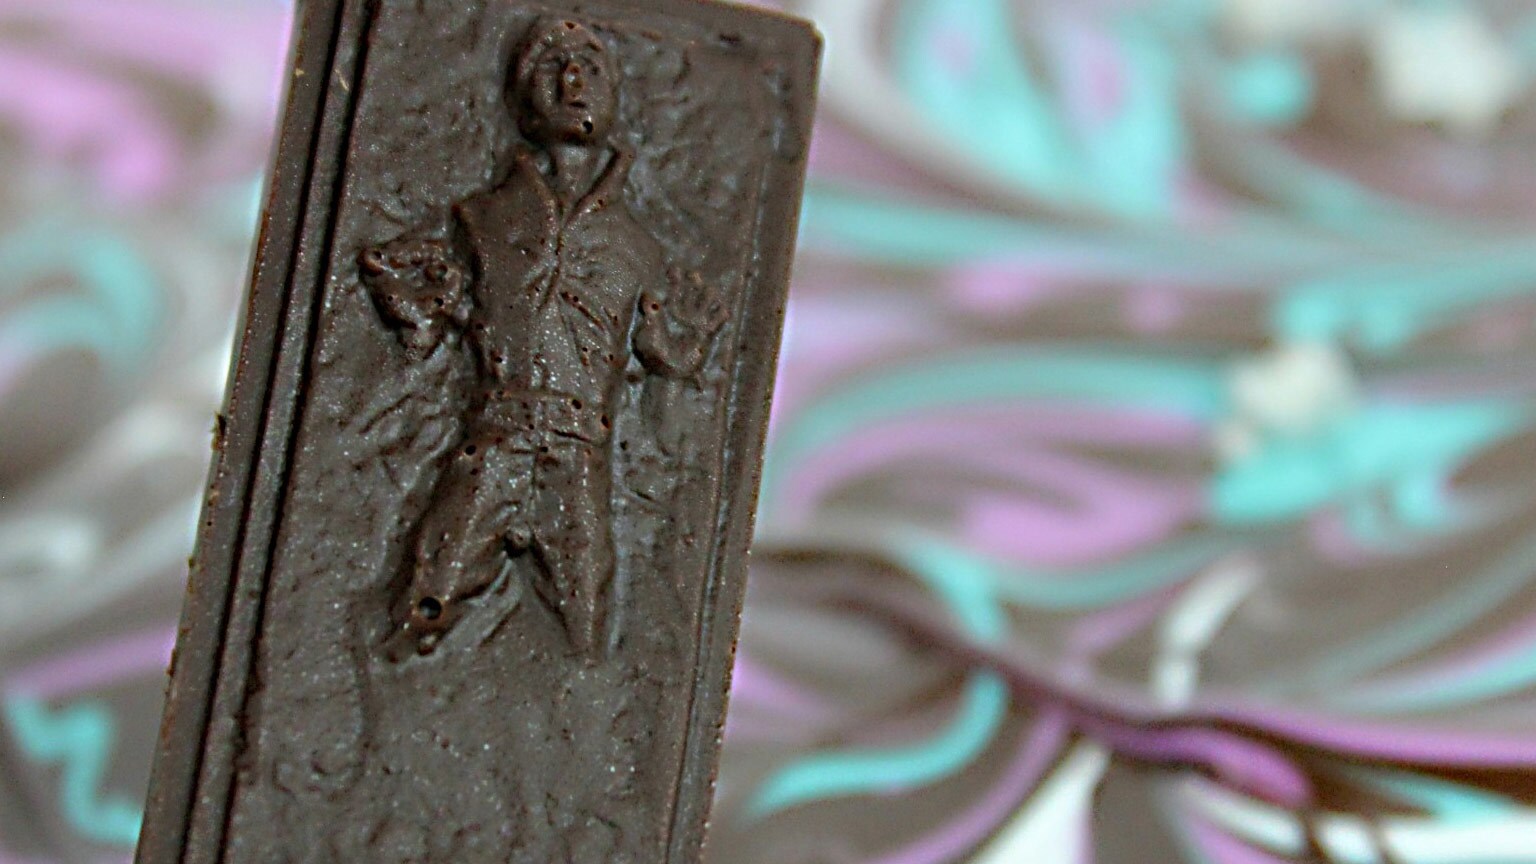 From Jabba’s Favorite Decoration to Our Favorite Dessert: Han Solo Chocolate Carbonite Bark!